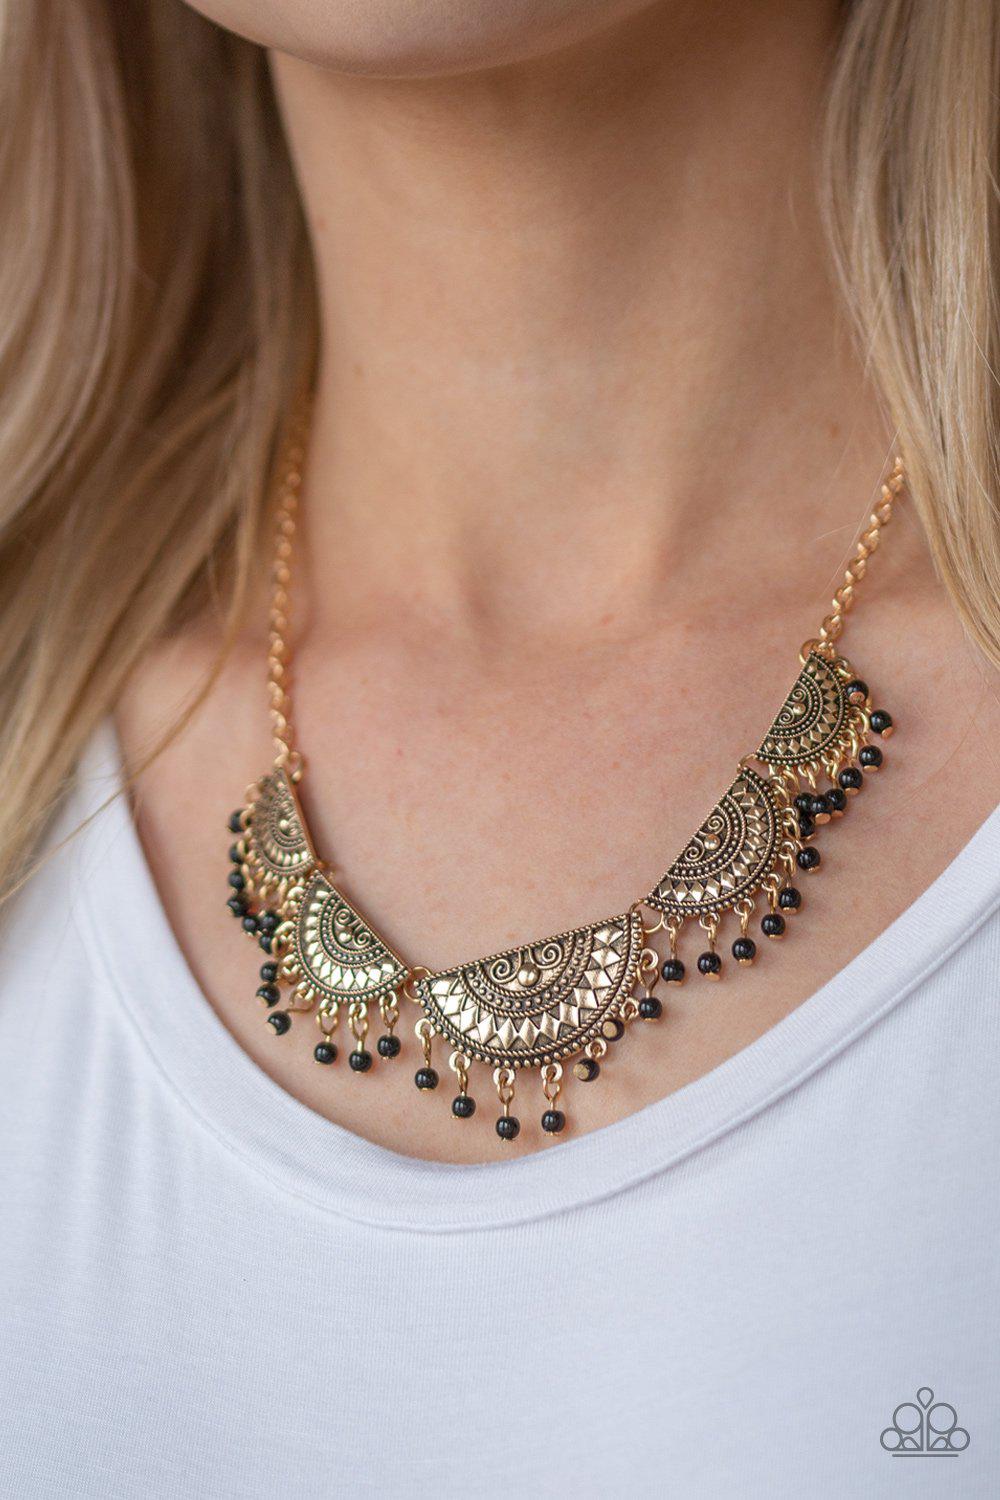 Boho Baby Gold and Black Necklace - Paparazzi Accessories - model -CarasShop.com - $5 Jewelry by Cara Jewels